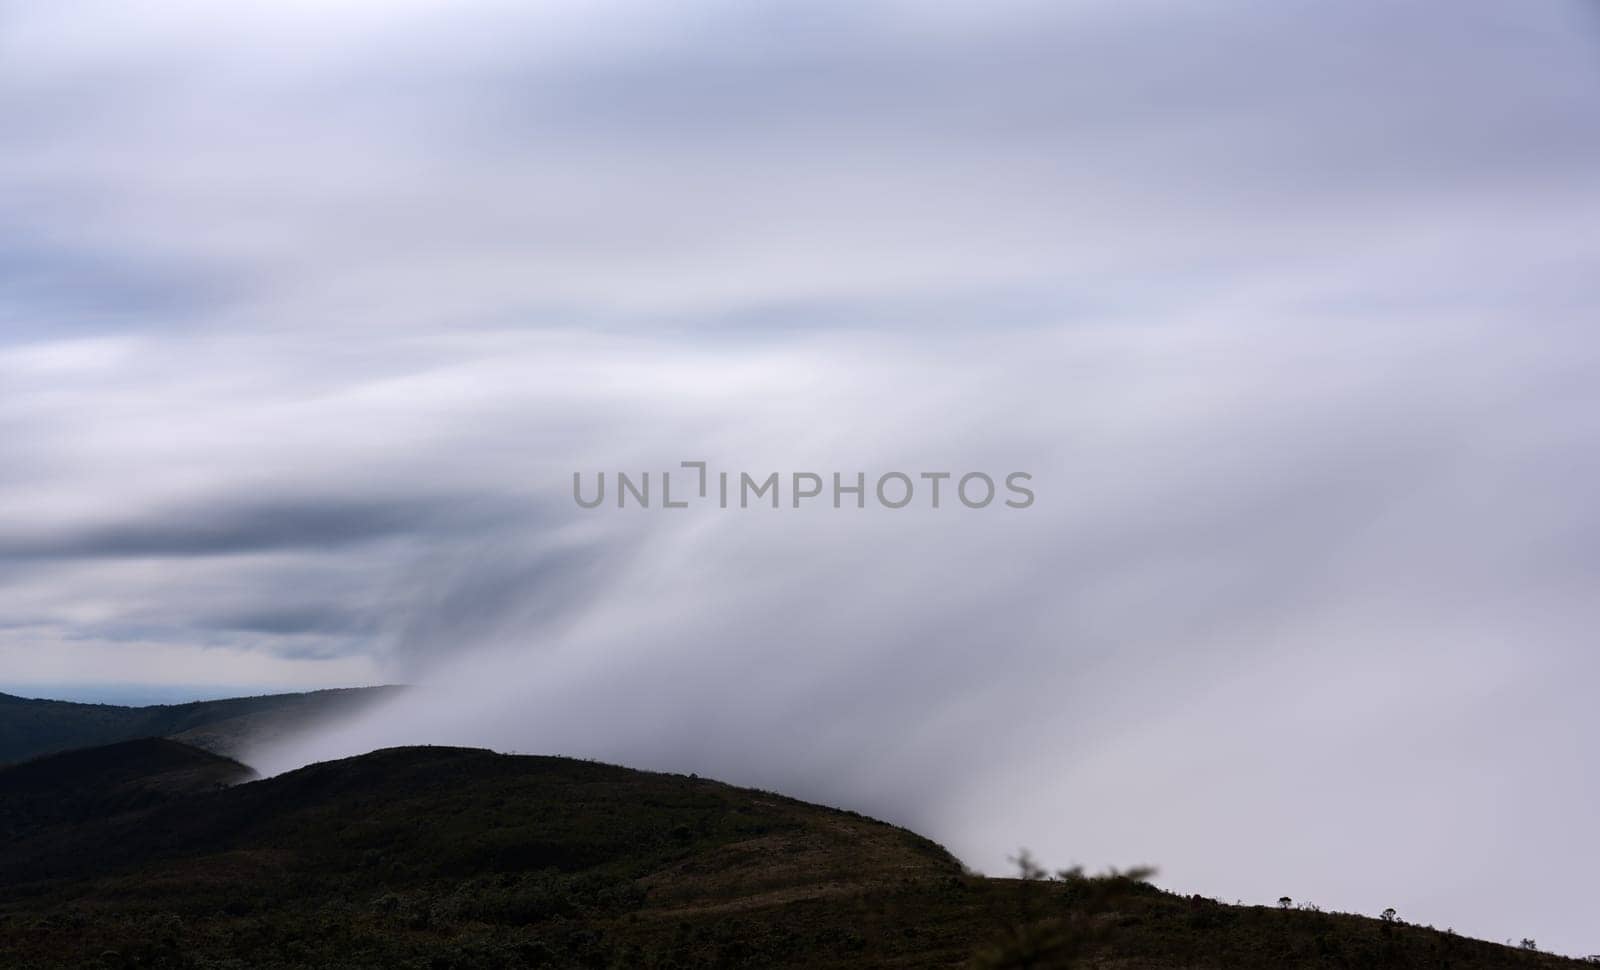 A long exposure shot captures the mist attempting to overcome the mountain peak, only to be stopped by strong winds from the opposite direction. The resulting effect is a stunning column of clouds reaching up towards the sky, creating a breathtaking landscape that is perfect for your next project.